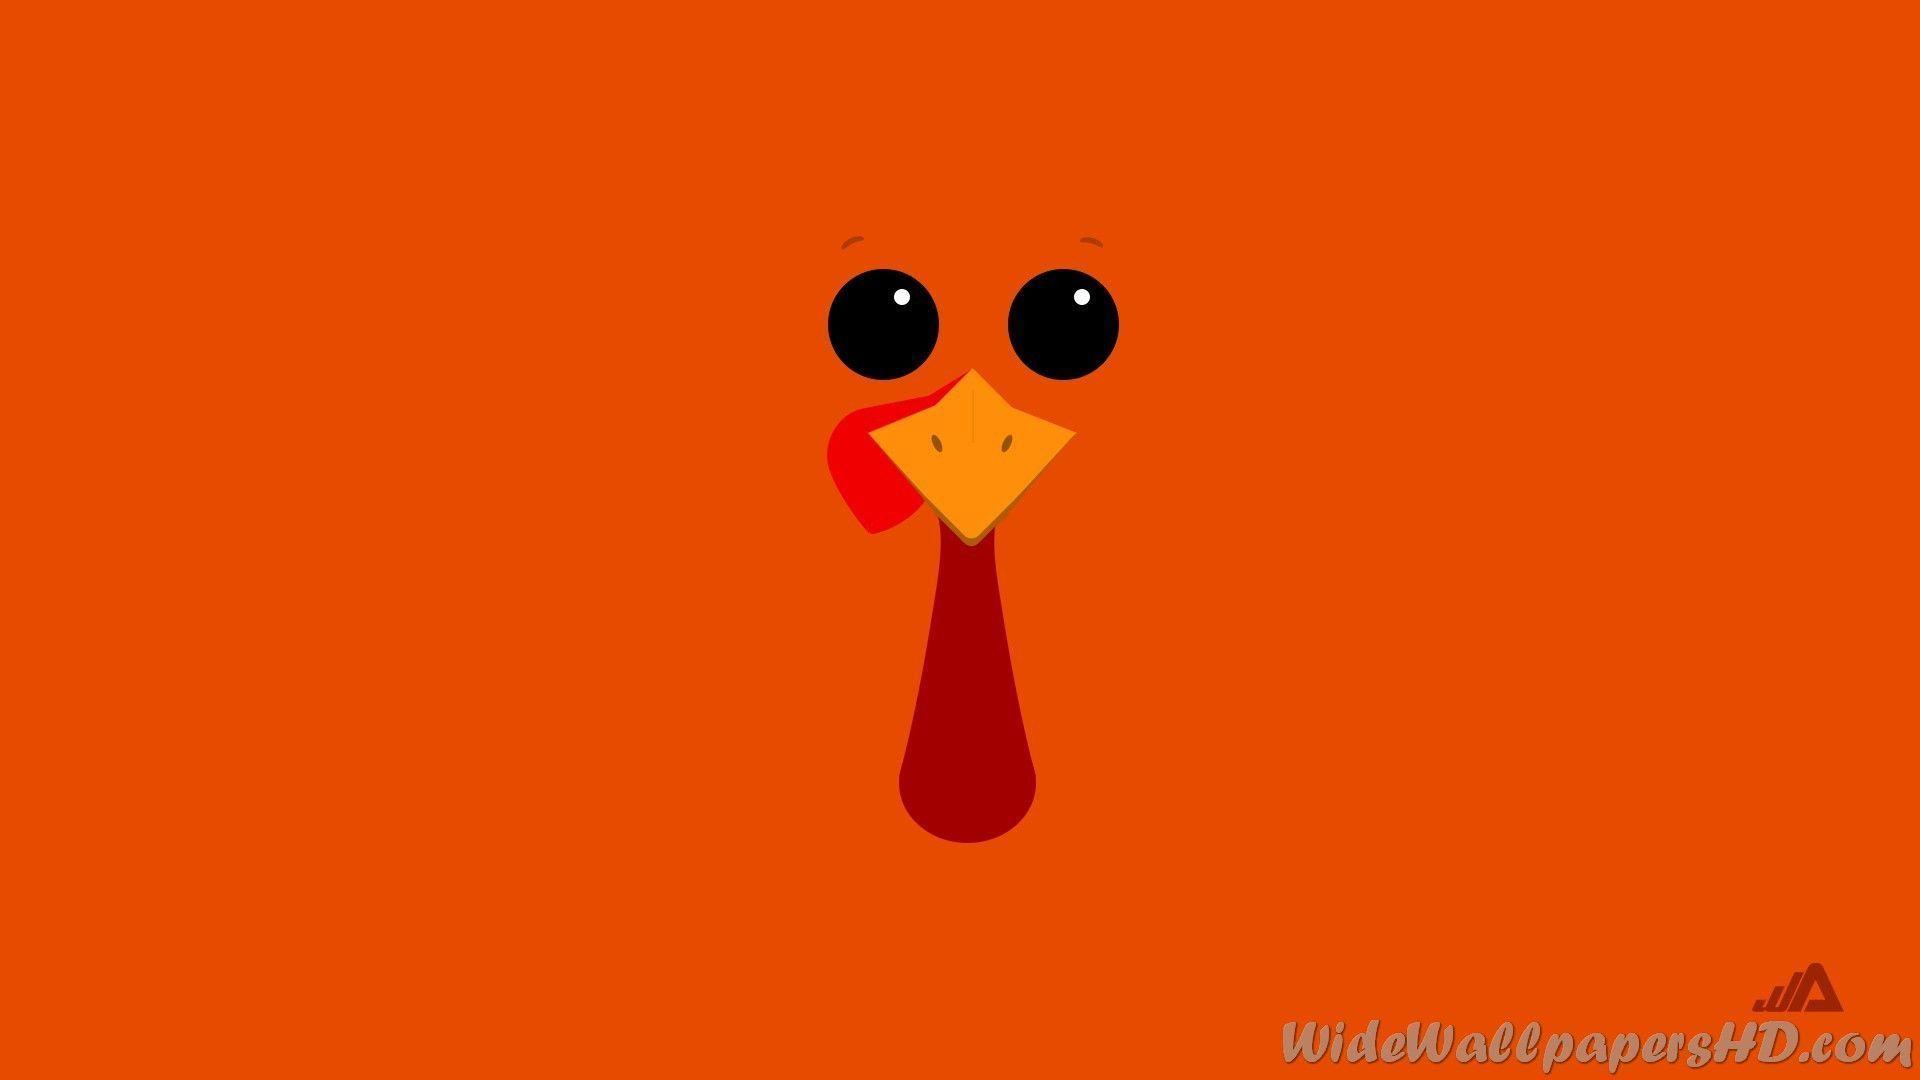 Thanksgiving Wallpaper and Thanksgiving Day Image